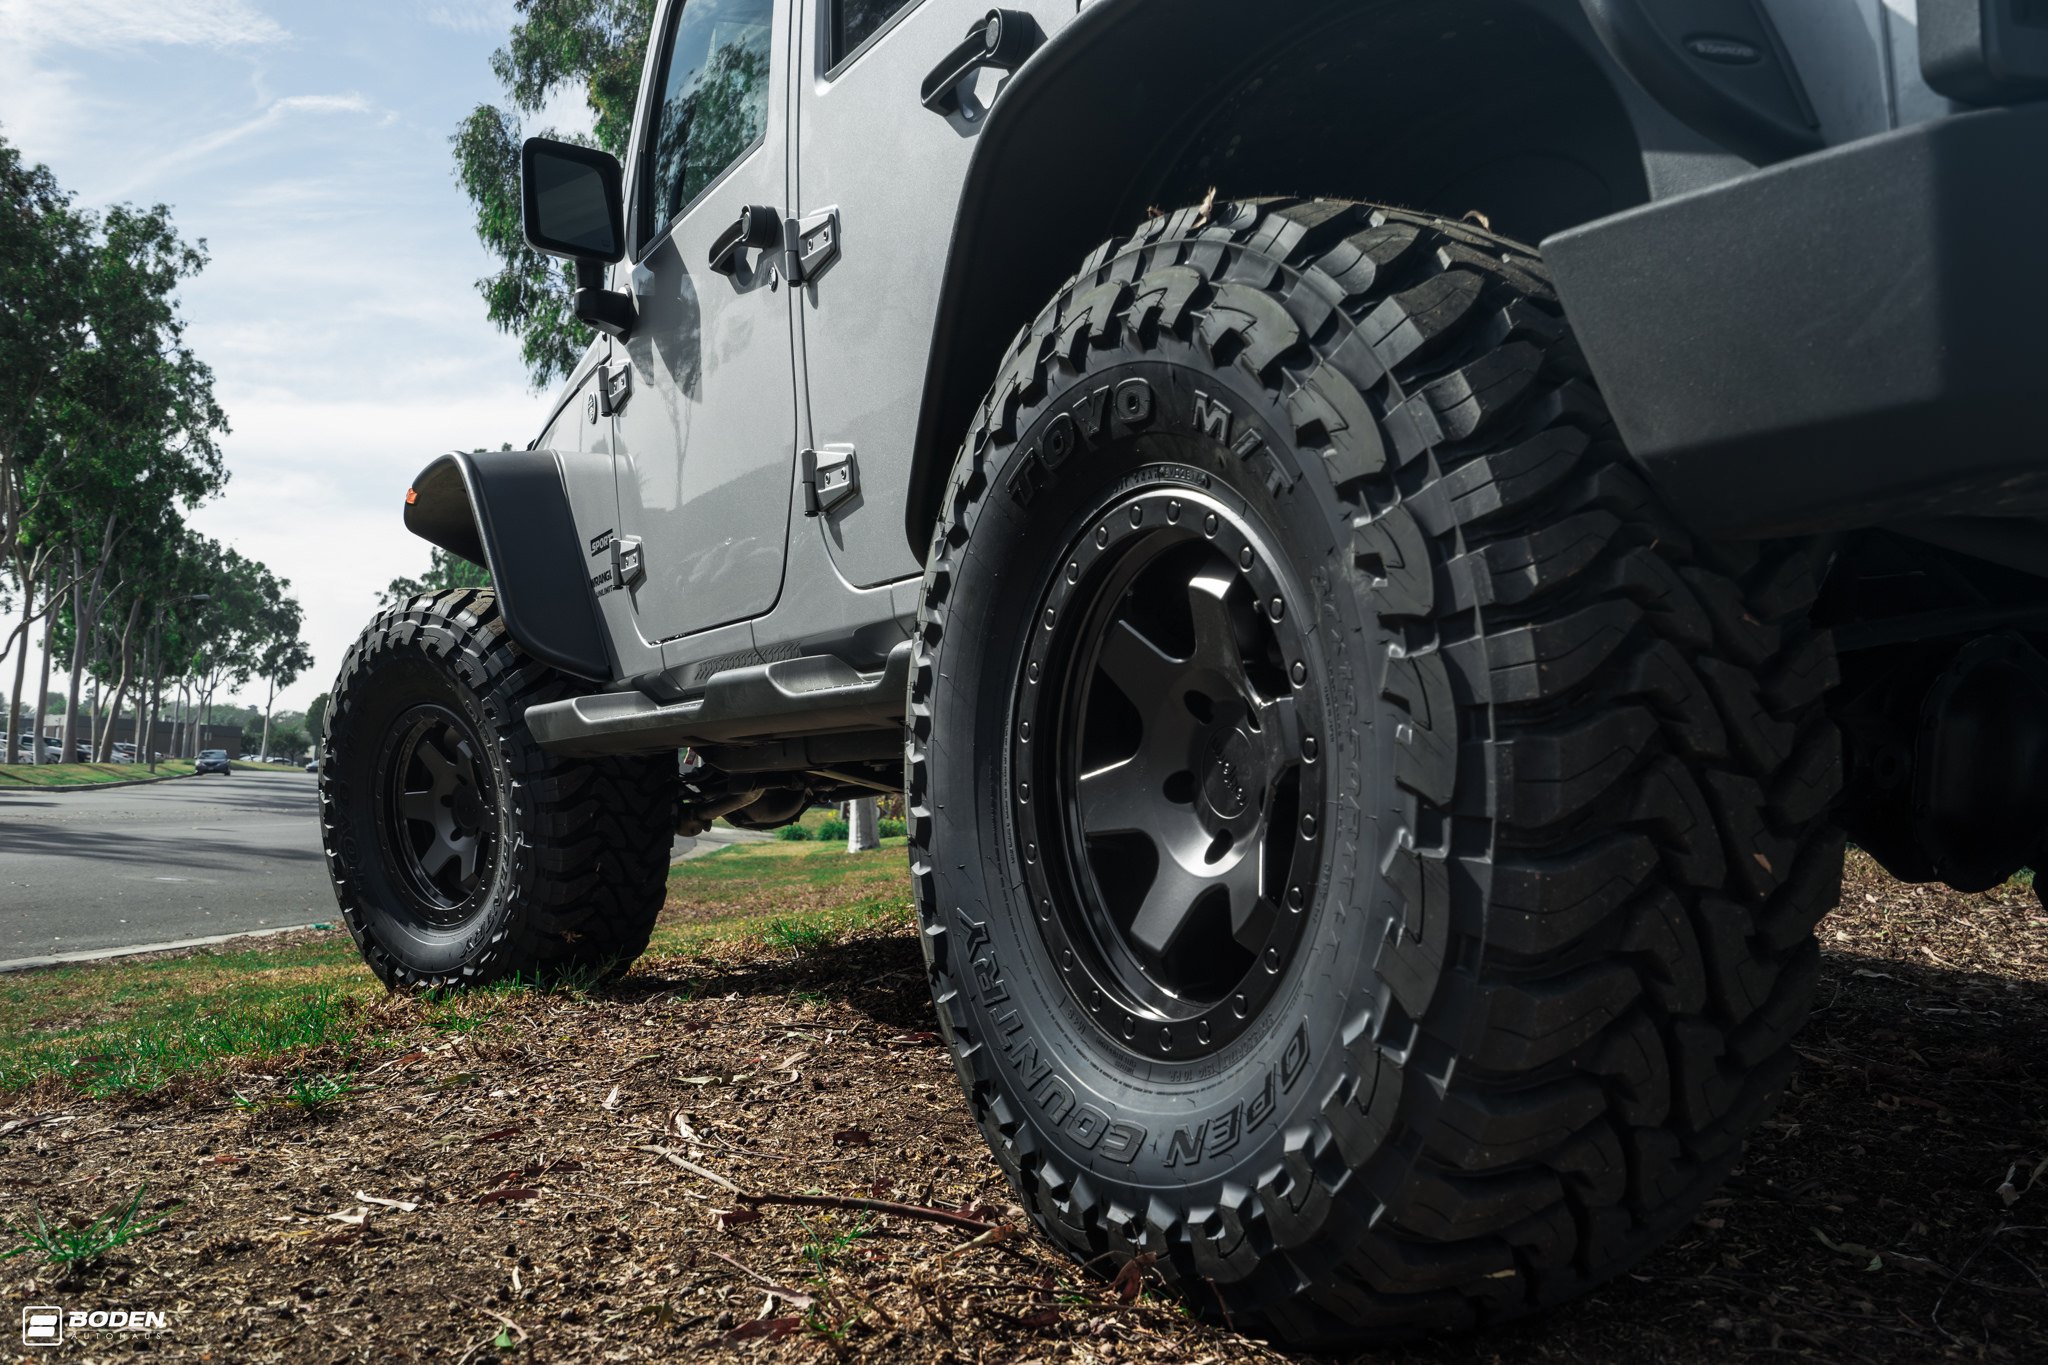 Oversized R17 and R18 Off-Road Tires for Jeep Wrangler at CARiD   - The top destination for Jeep JK and JL Wrangler news, rumors, and  discussion